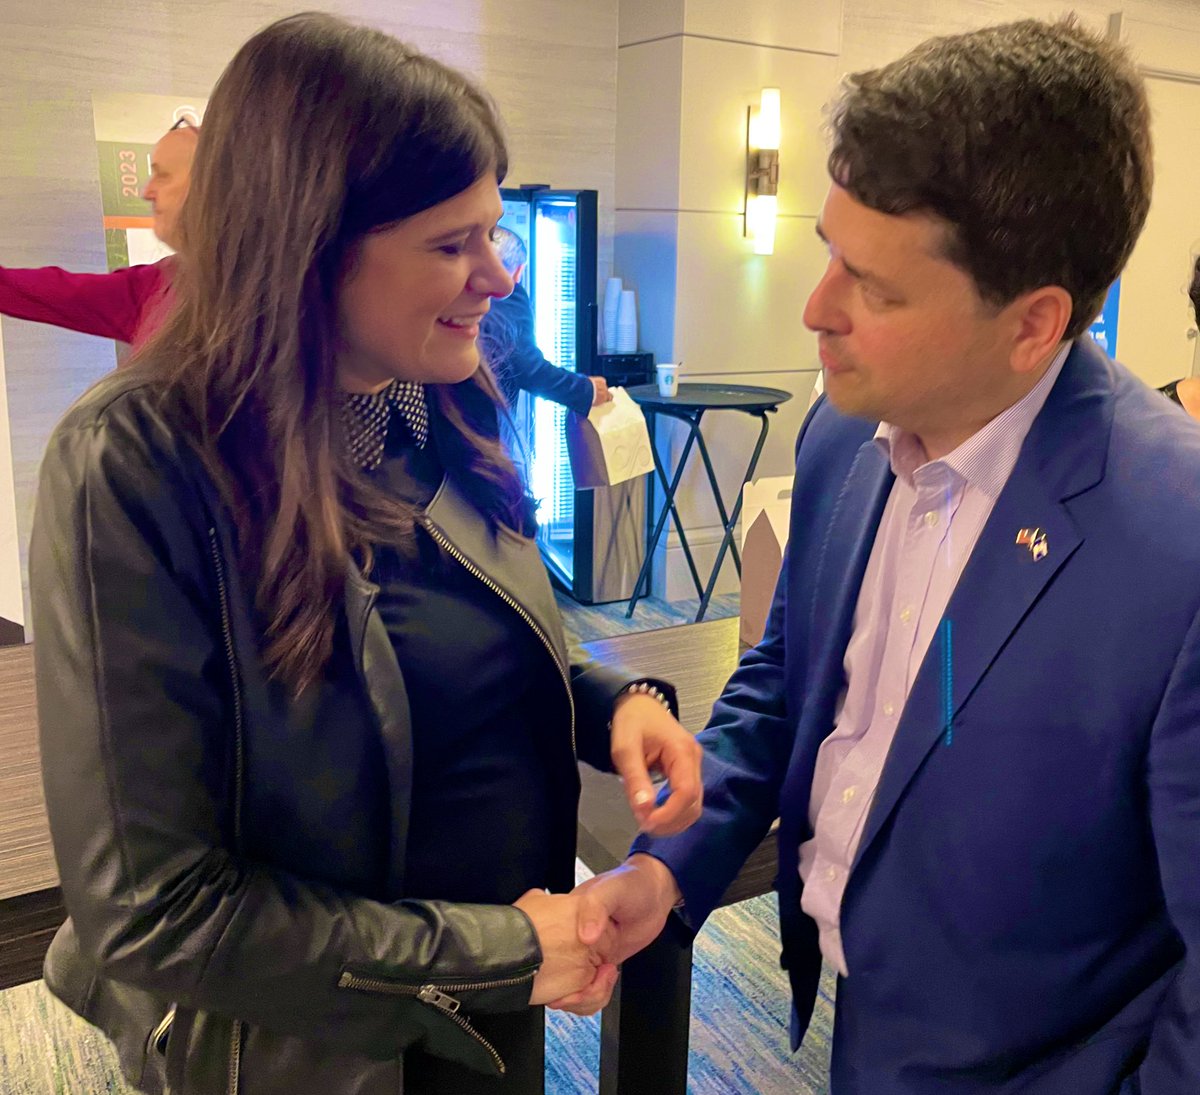 Enjoyed being back in Detroit for the @USGLC’s #HeartlandSummit23. Among many conversations, I appreciated speaking w/ @RepHaleyStevens about her focus on manufacturing jobs and on how we can promote STEM education to ensure we’re cultivating the workforce of the future. 🇺🇸